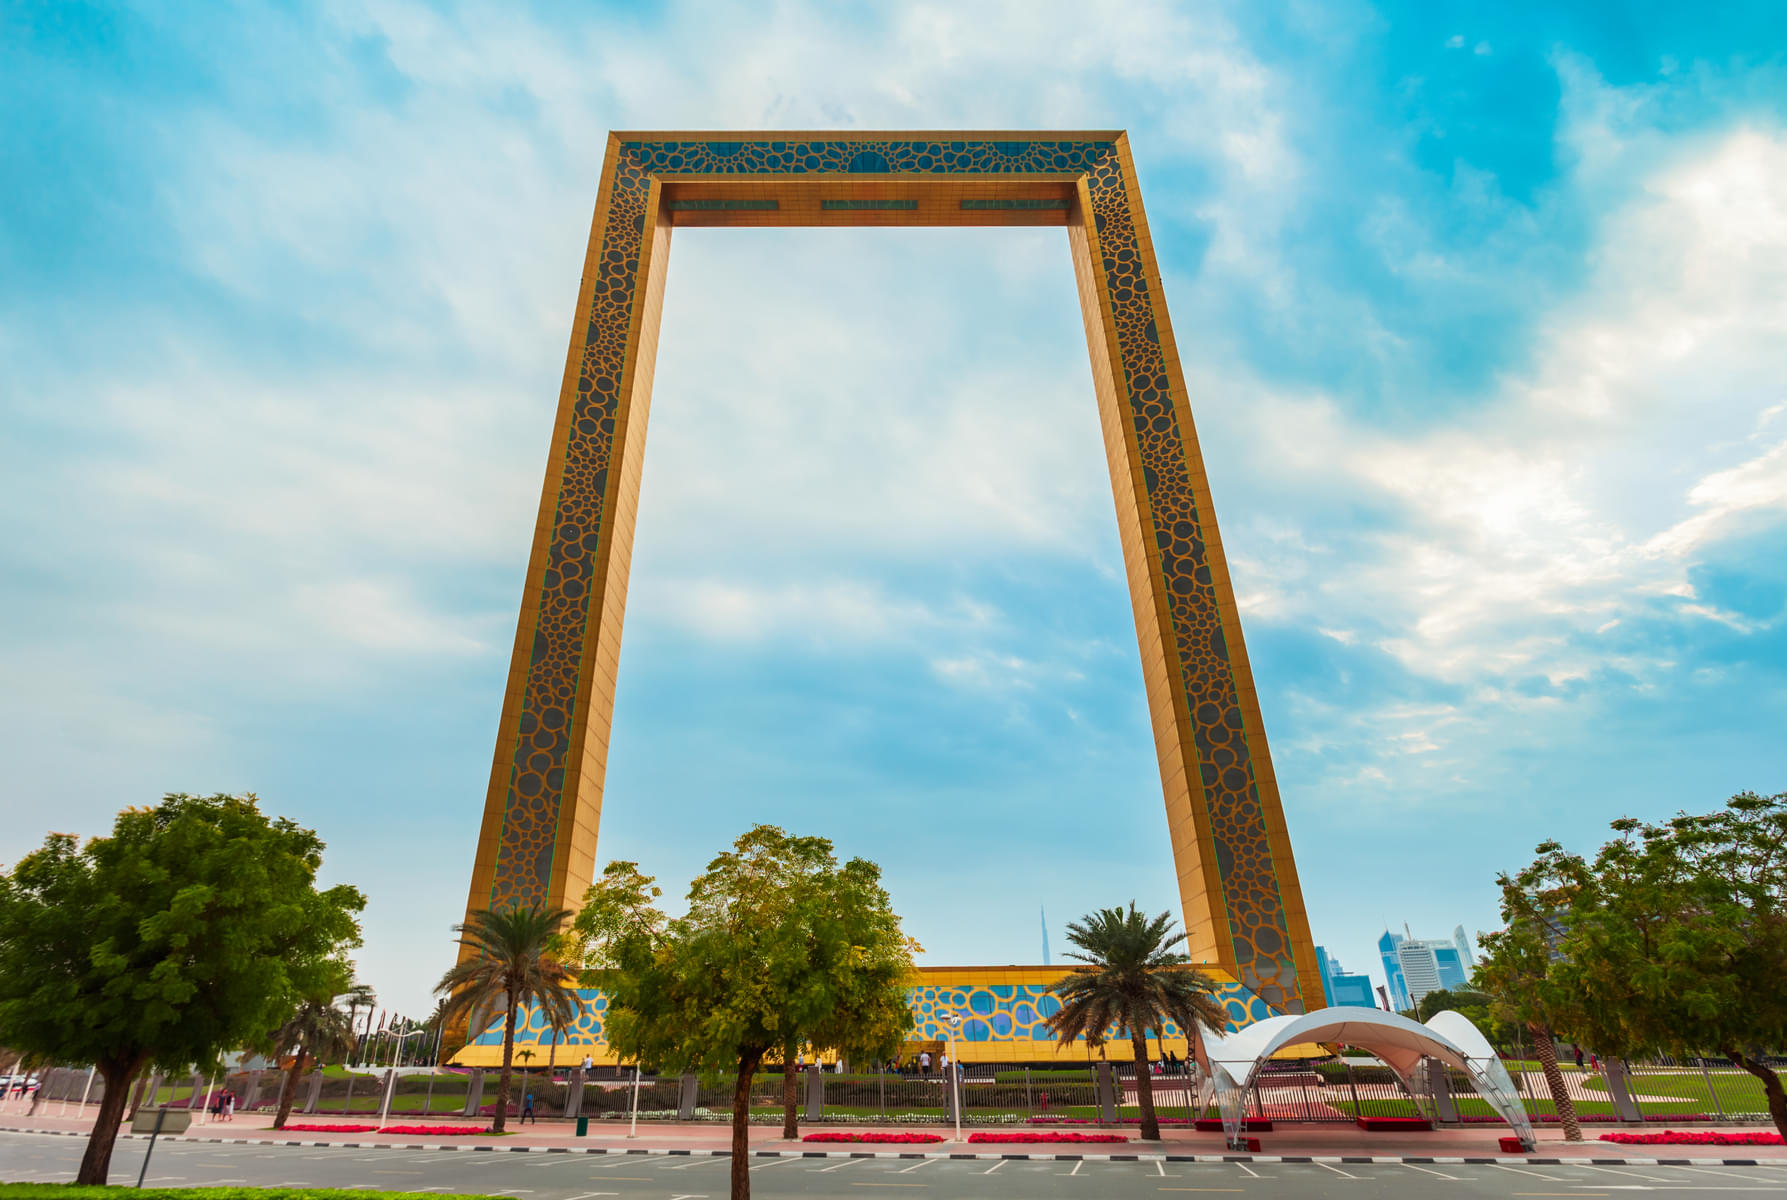 See the world's most giant frame of 150 m height & 95 m width